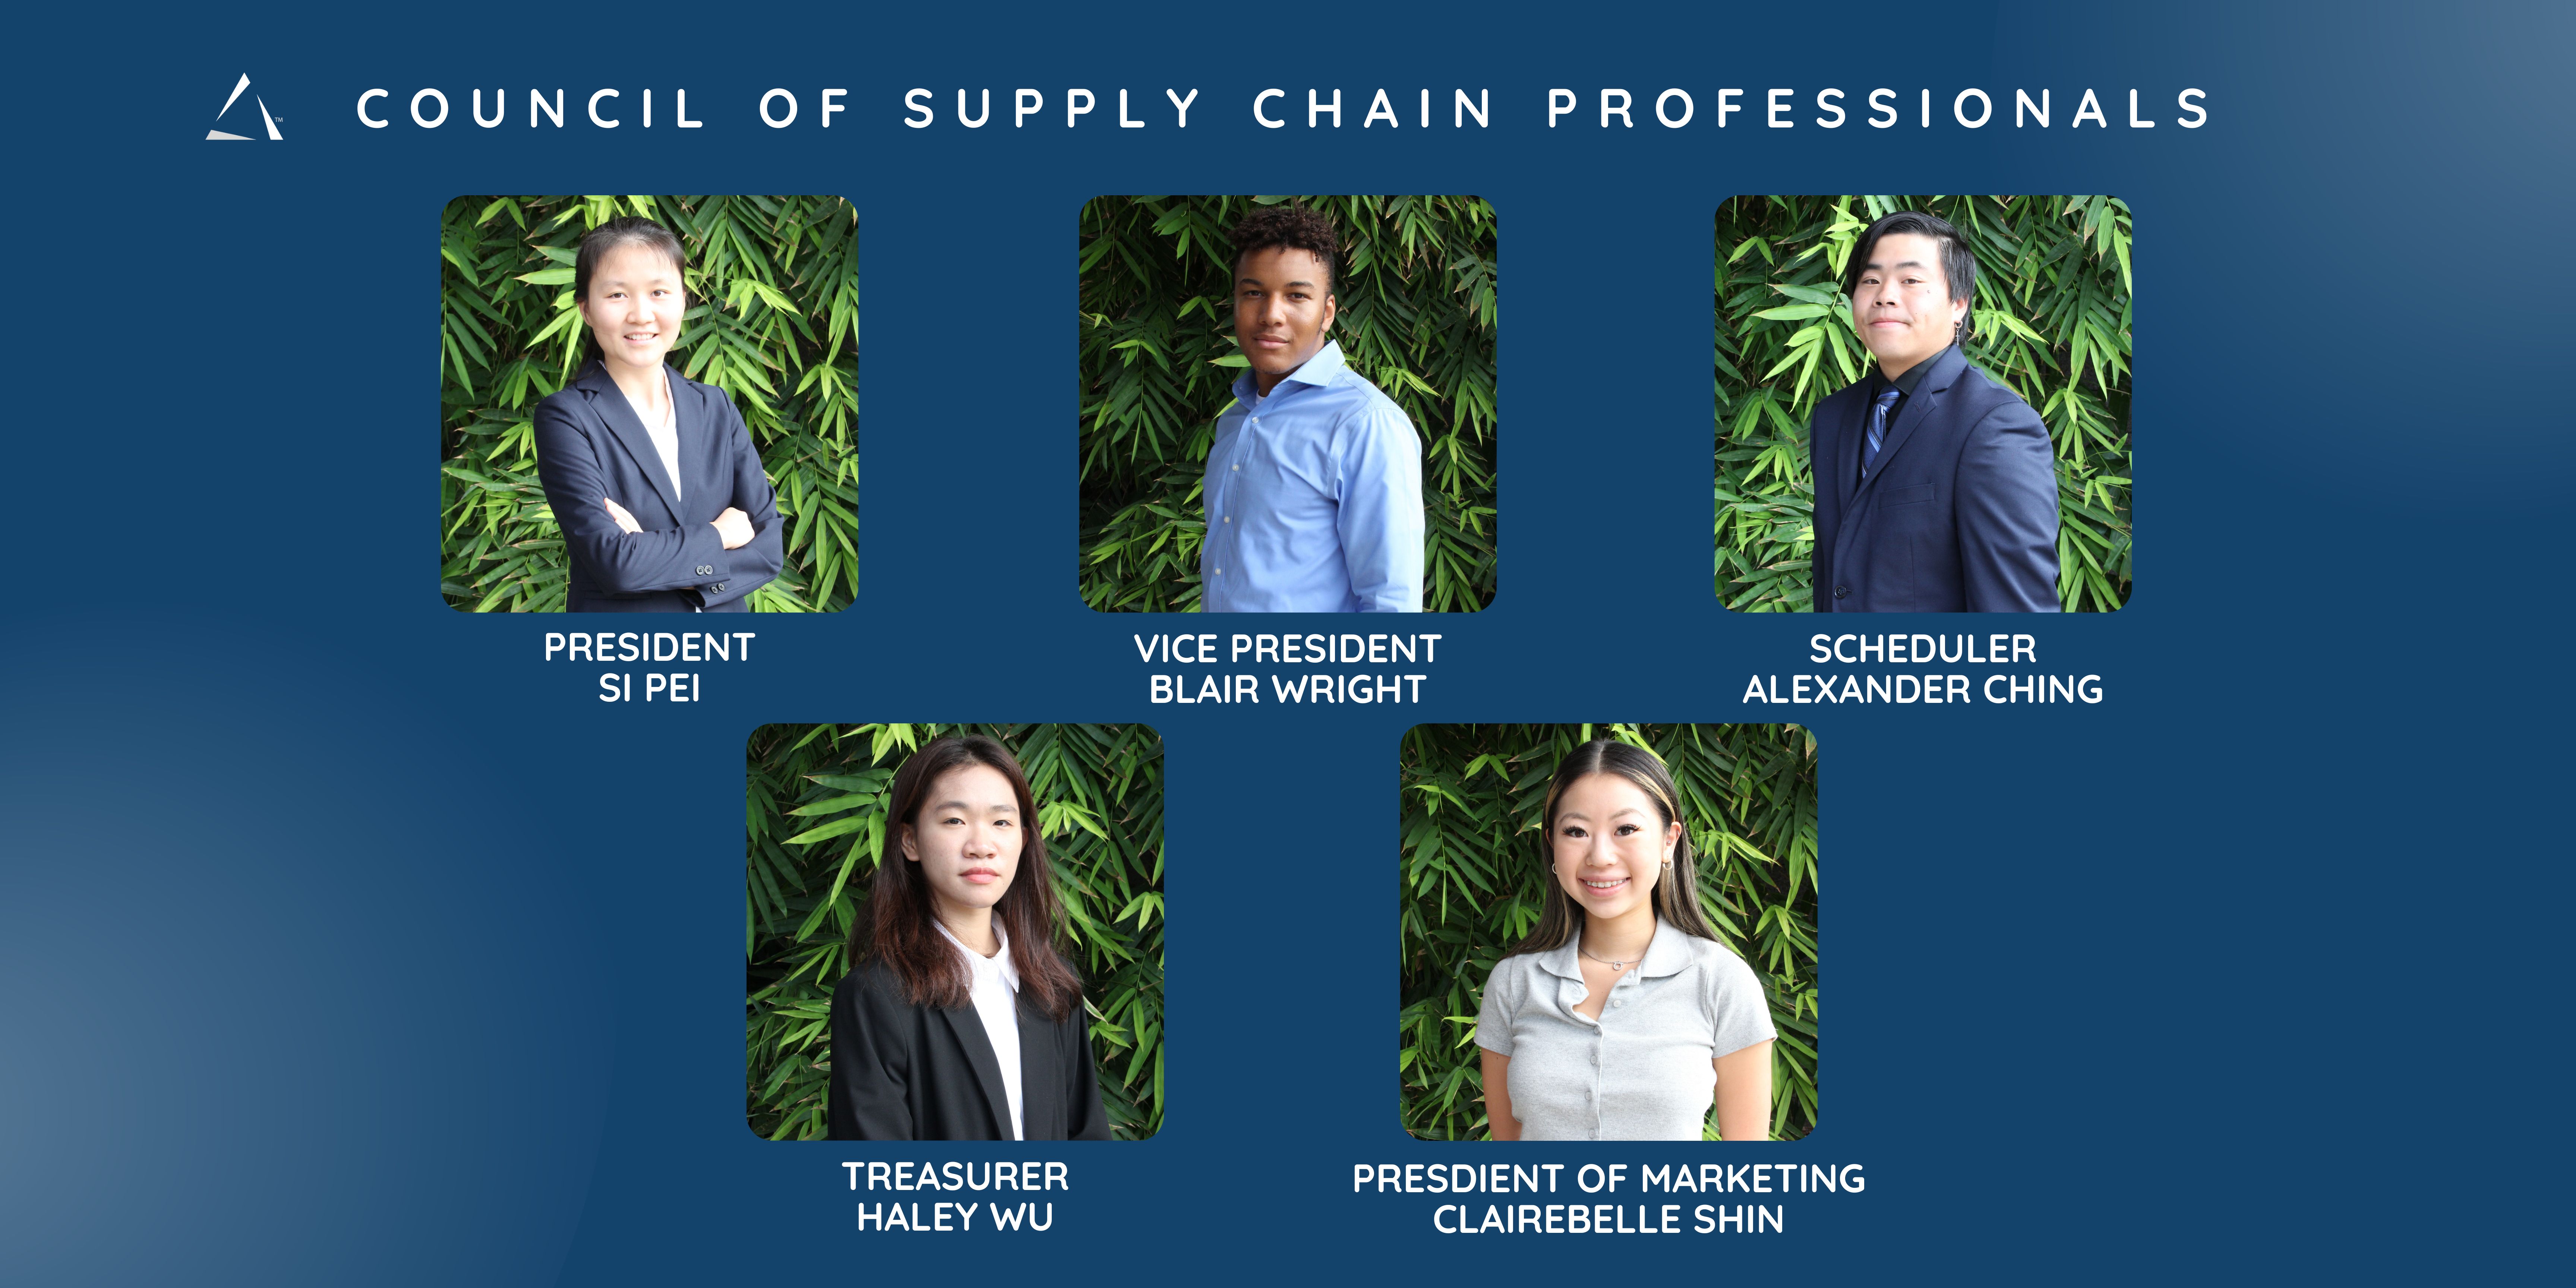 Council of Supply Chain Professionals.  President Si Pei. Vice President Blair Wright. Scheduler Alexander Ching. Treasurer Haley Wu. President of Marketing Clairebelle Shin